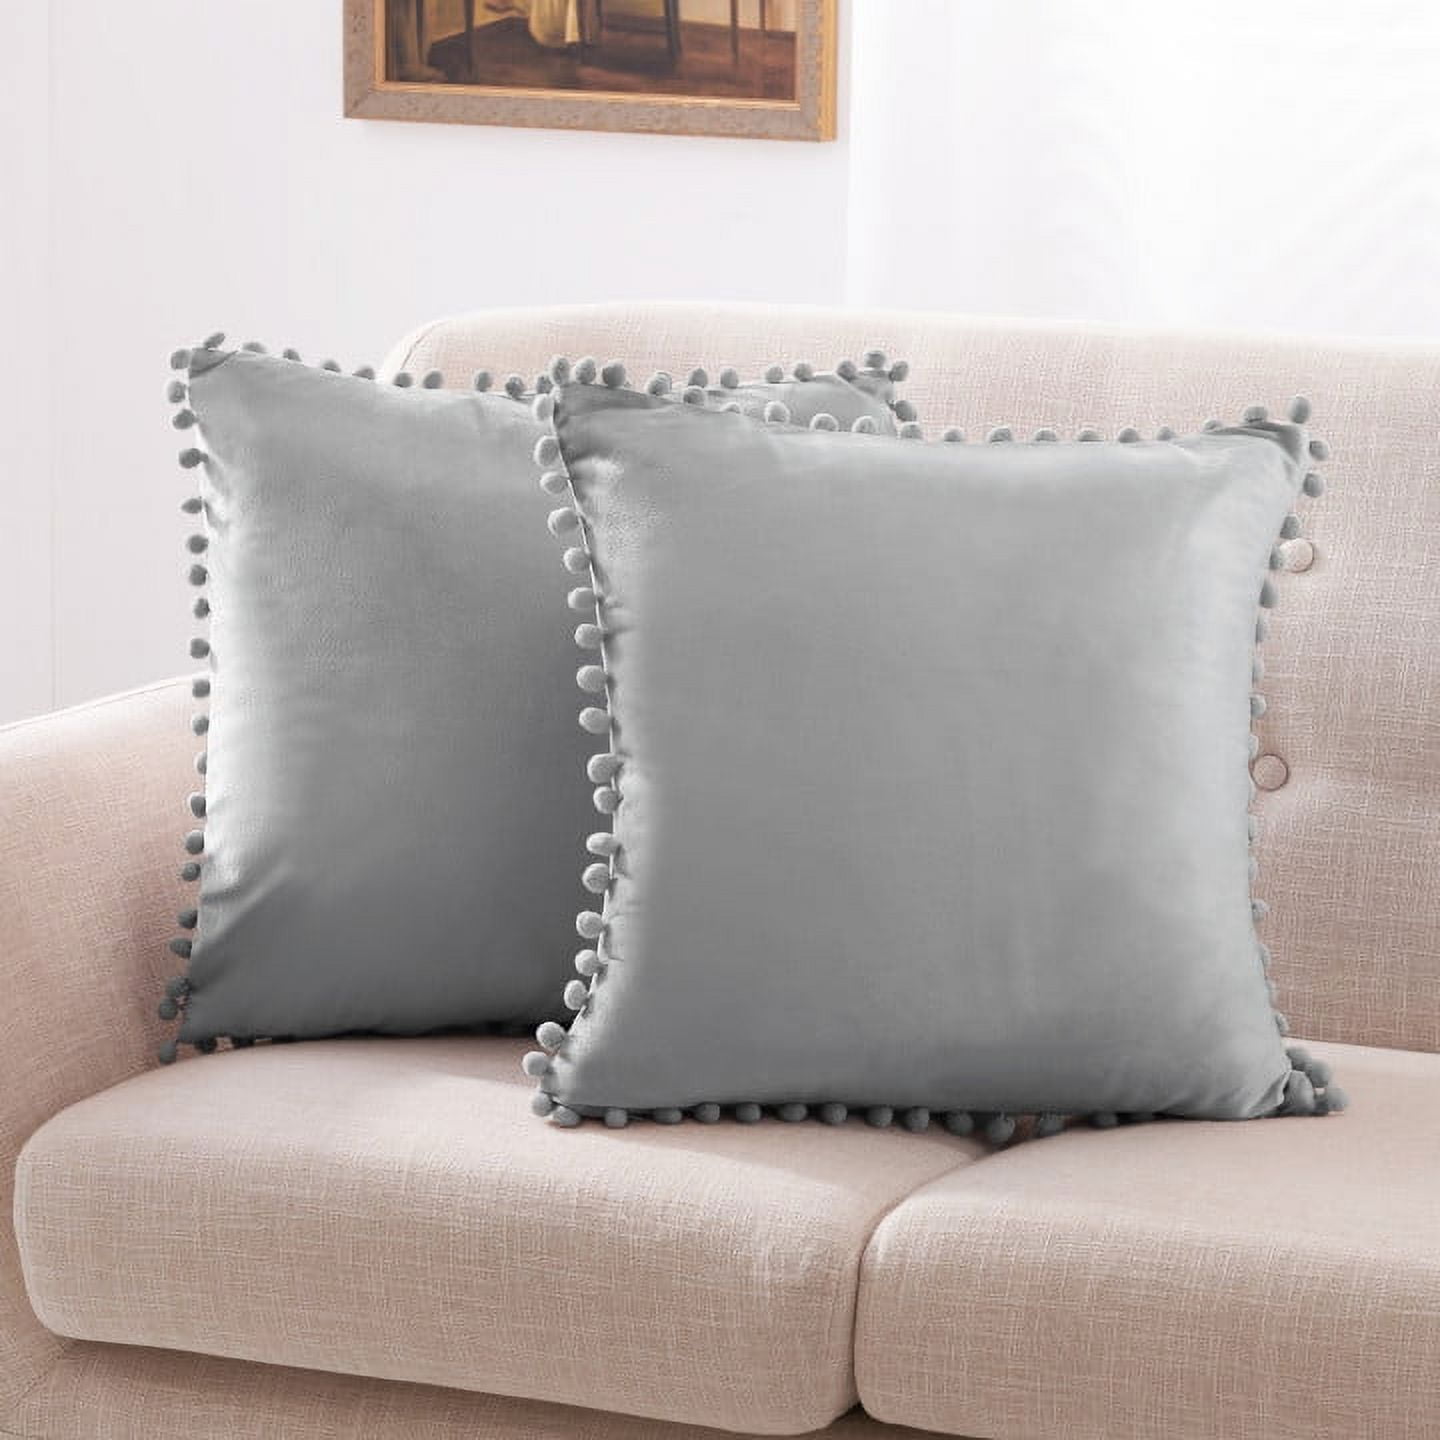 Hannah Linen Throw Pillows - 18 x 18 Pillow Insert Set of 4 - Throw Pillows  for Couch & Bed - Soft & Comfortable Square Pillows - Indoor/Outdoor